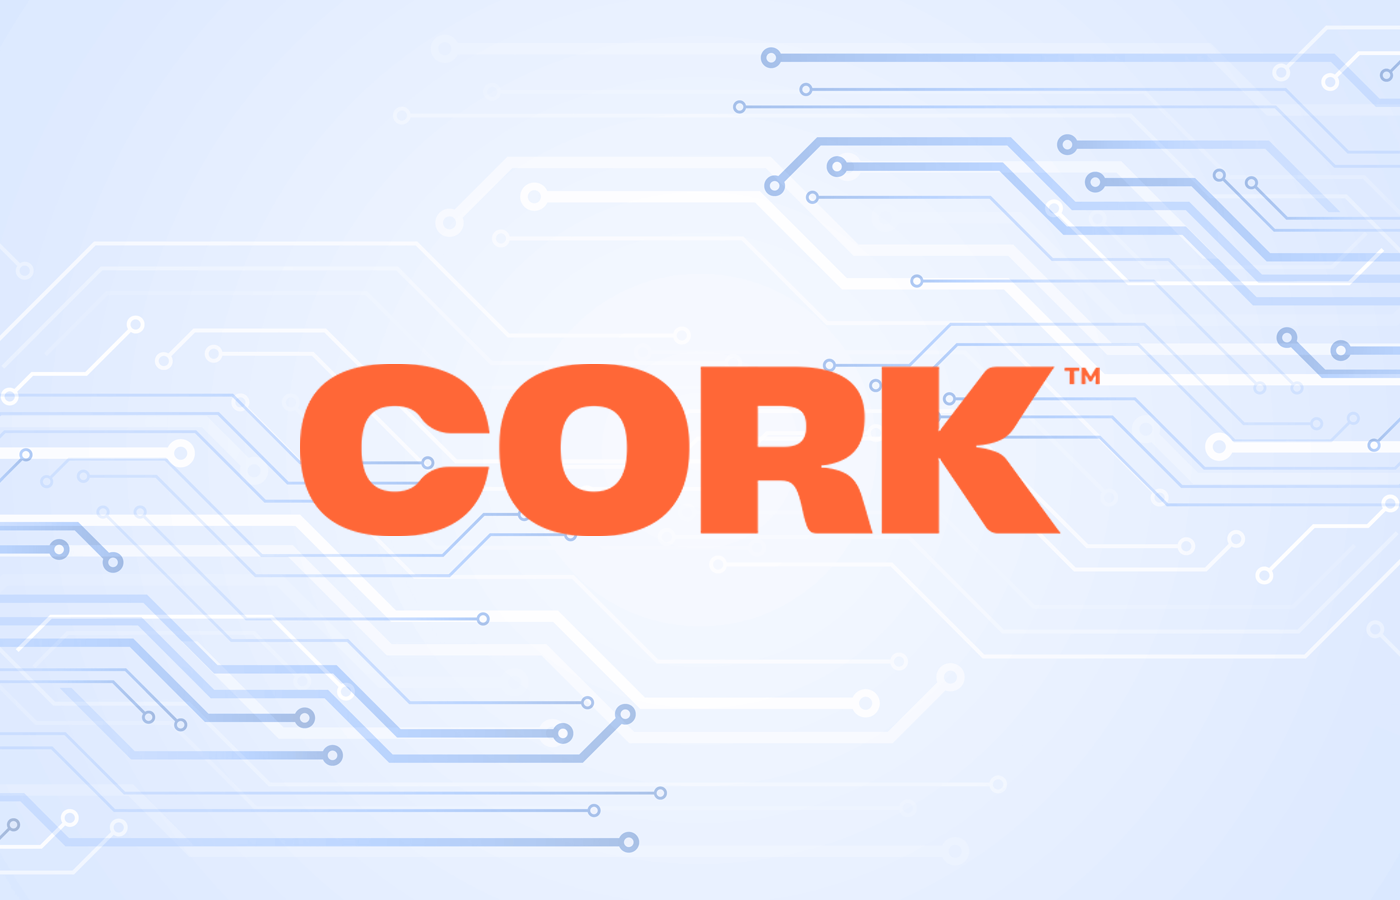 Introducing Cork 2.0: New Features, CEO, and Partner Growth